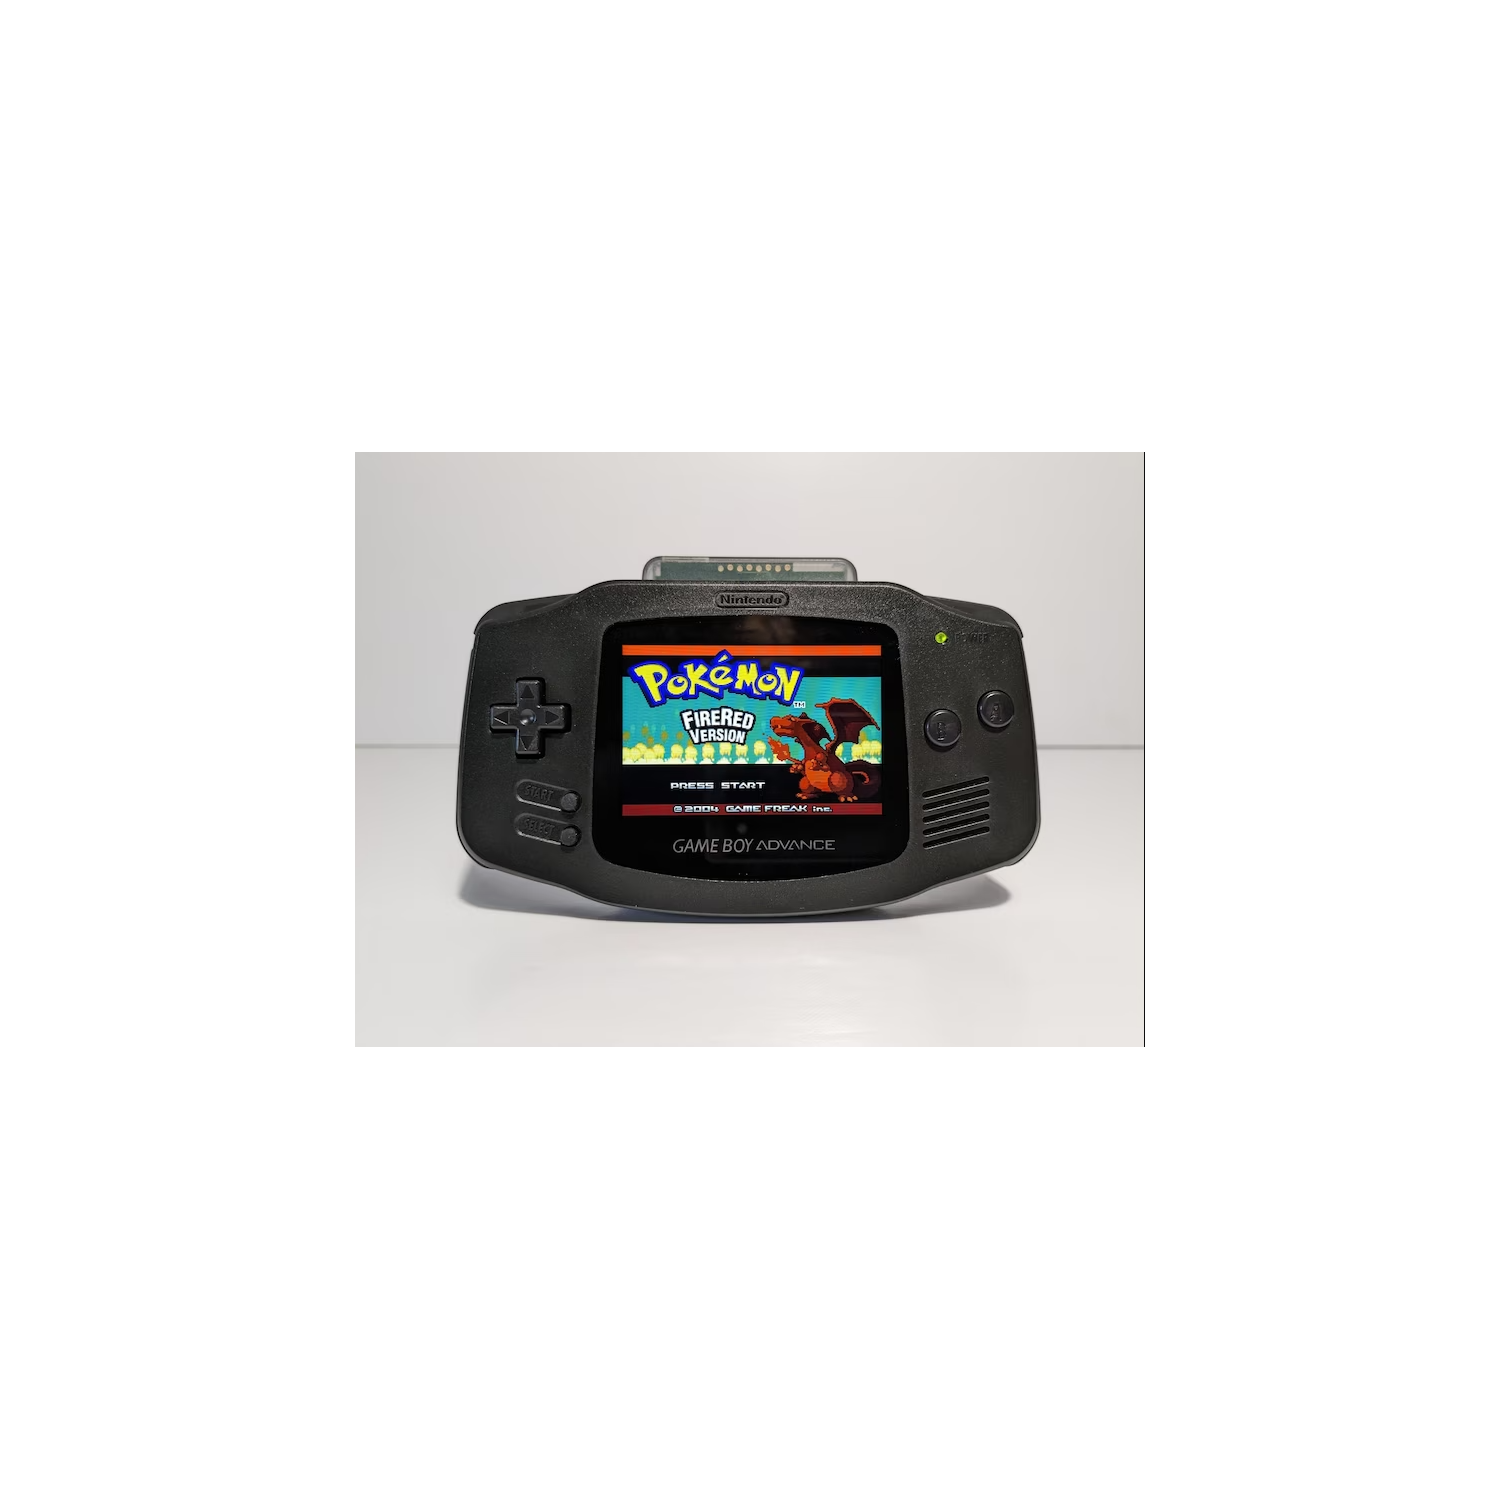 Authentic Refurbished Excellent Nintendo Gameboy Advance GBA Black Handheld Gaming BACKLIT IPS And USB-C Rechargeable Battery